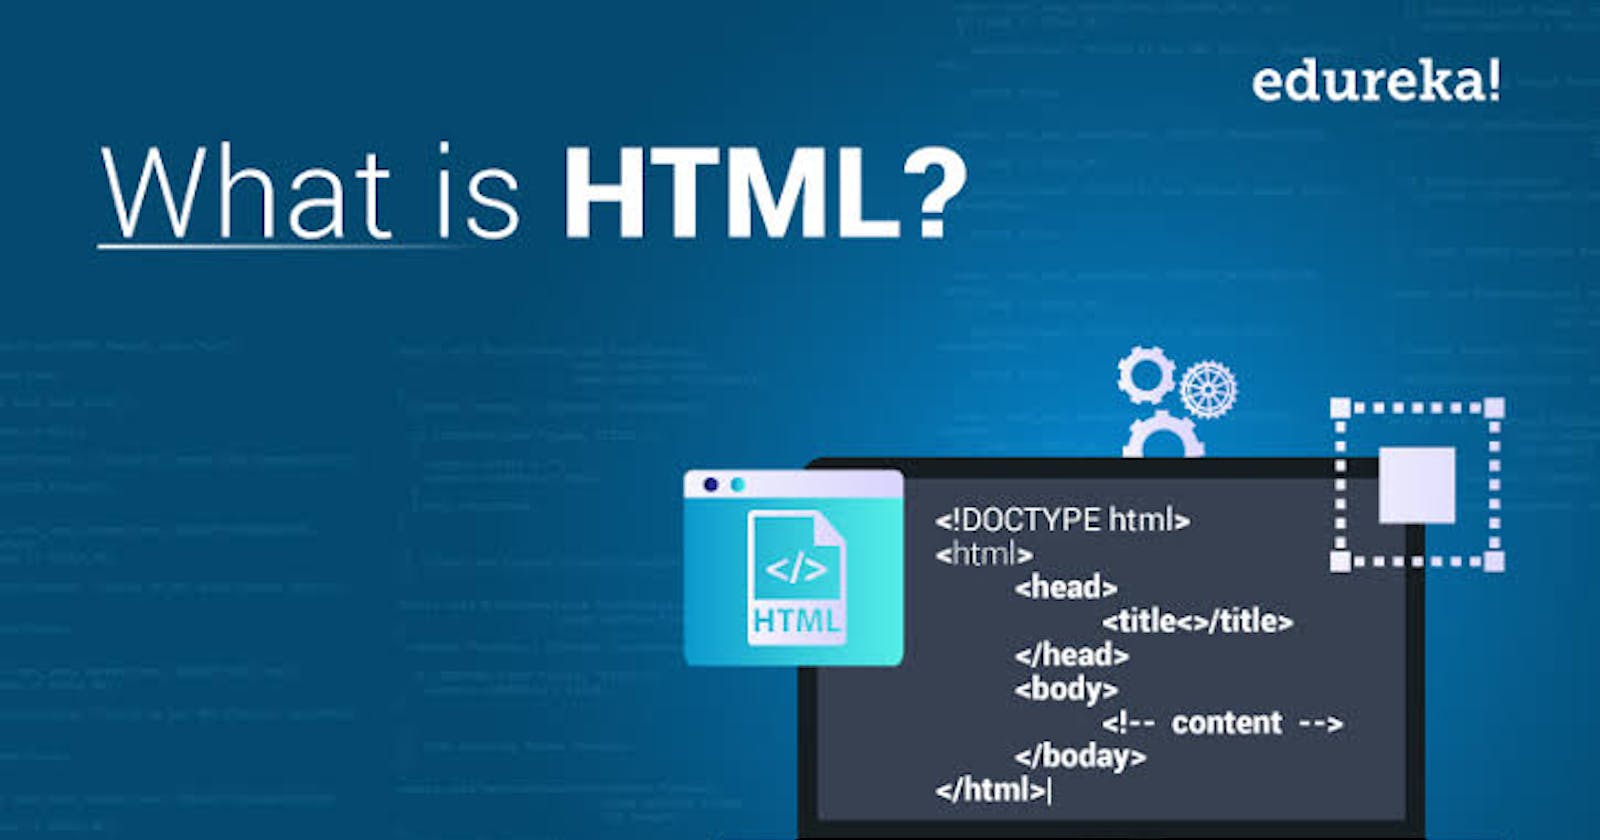 Getting Started with HTML (part 1)